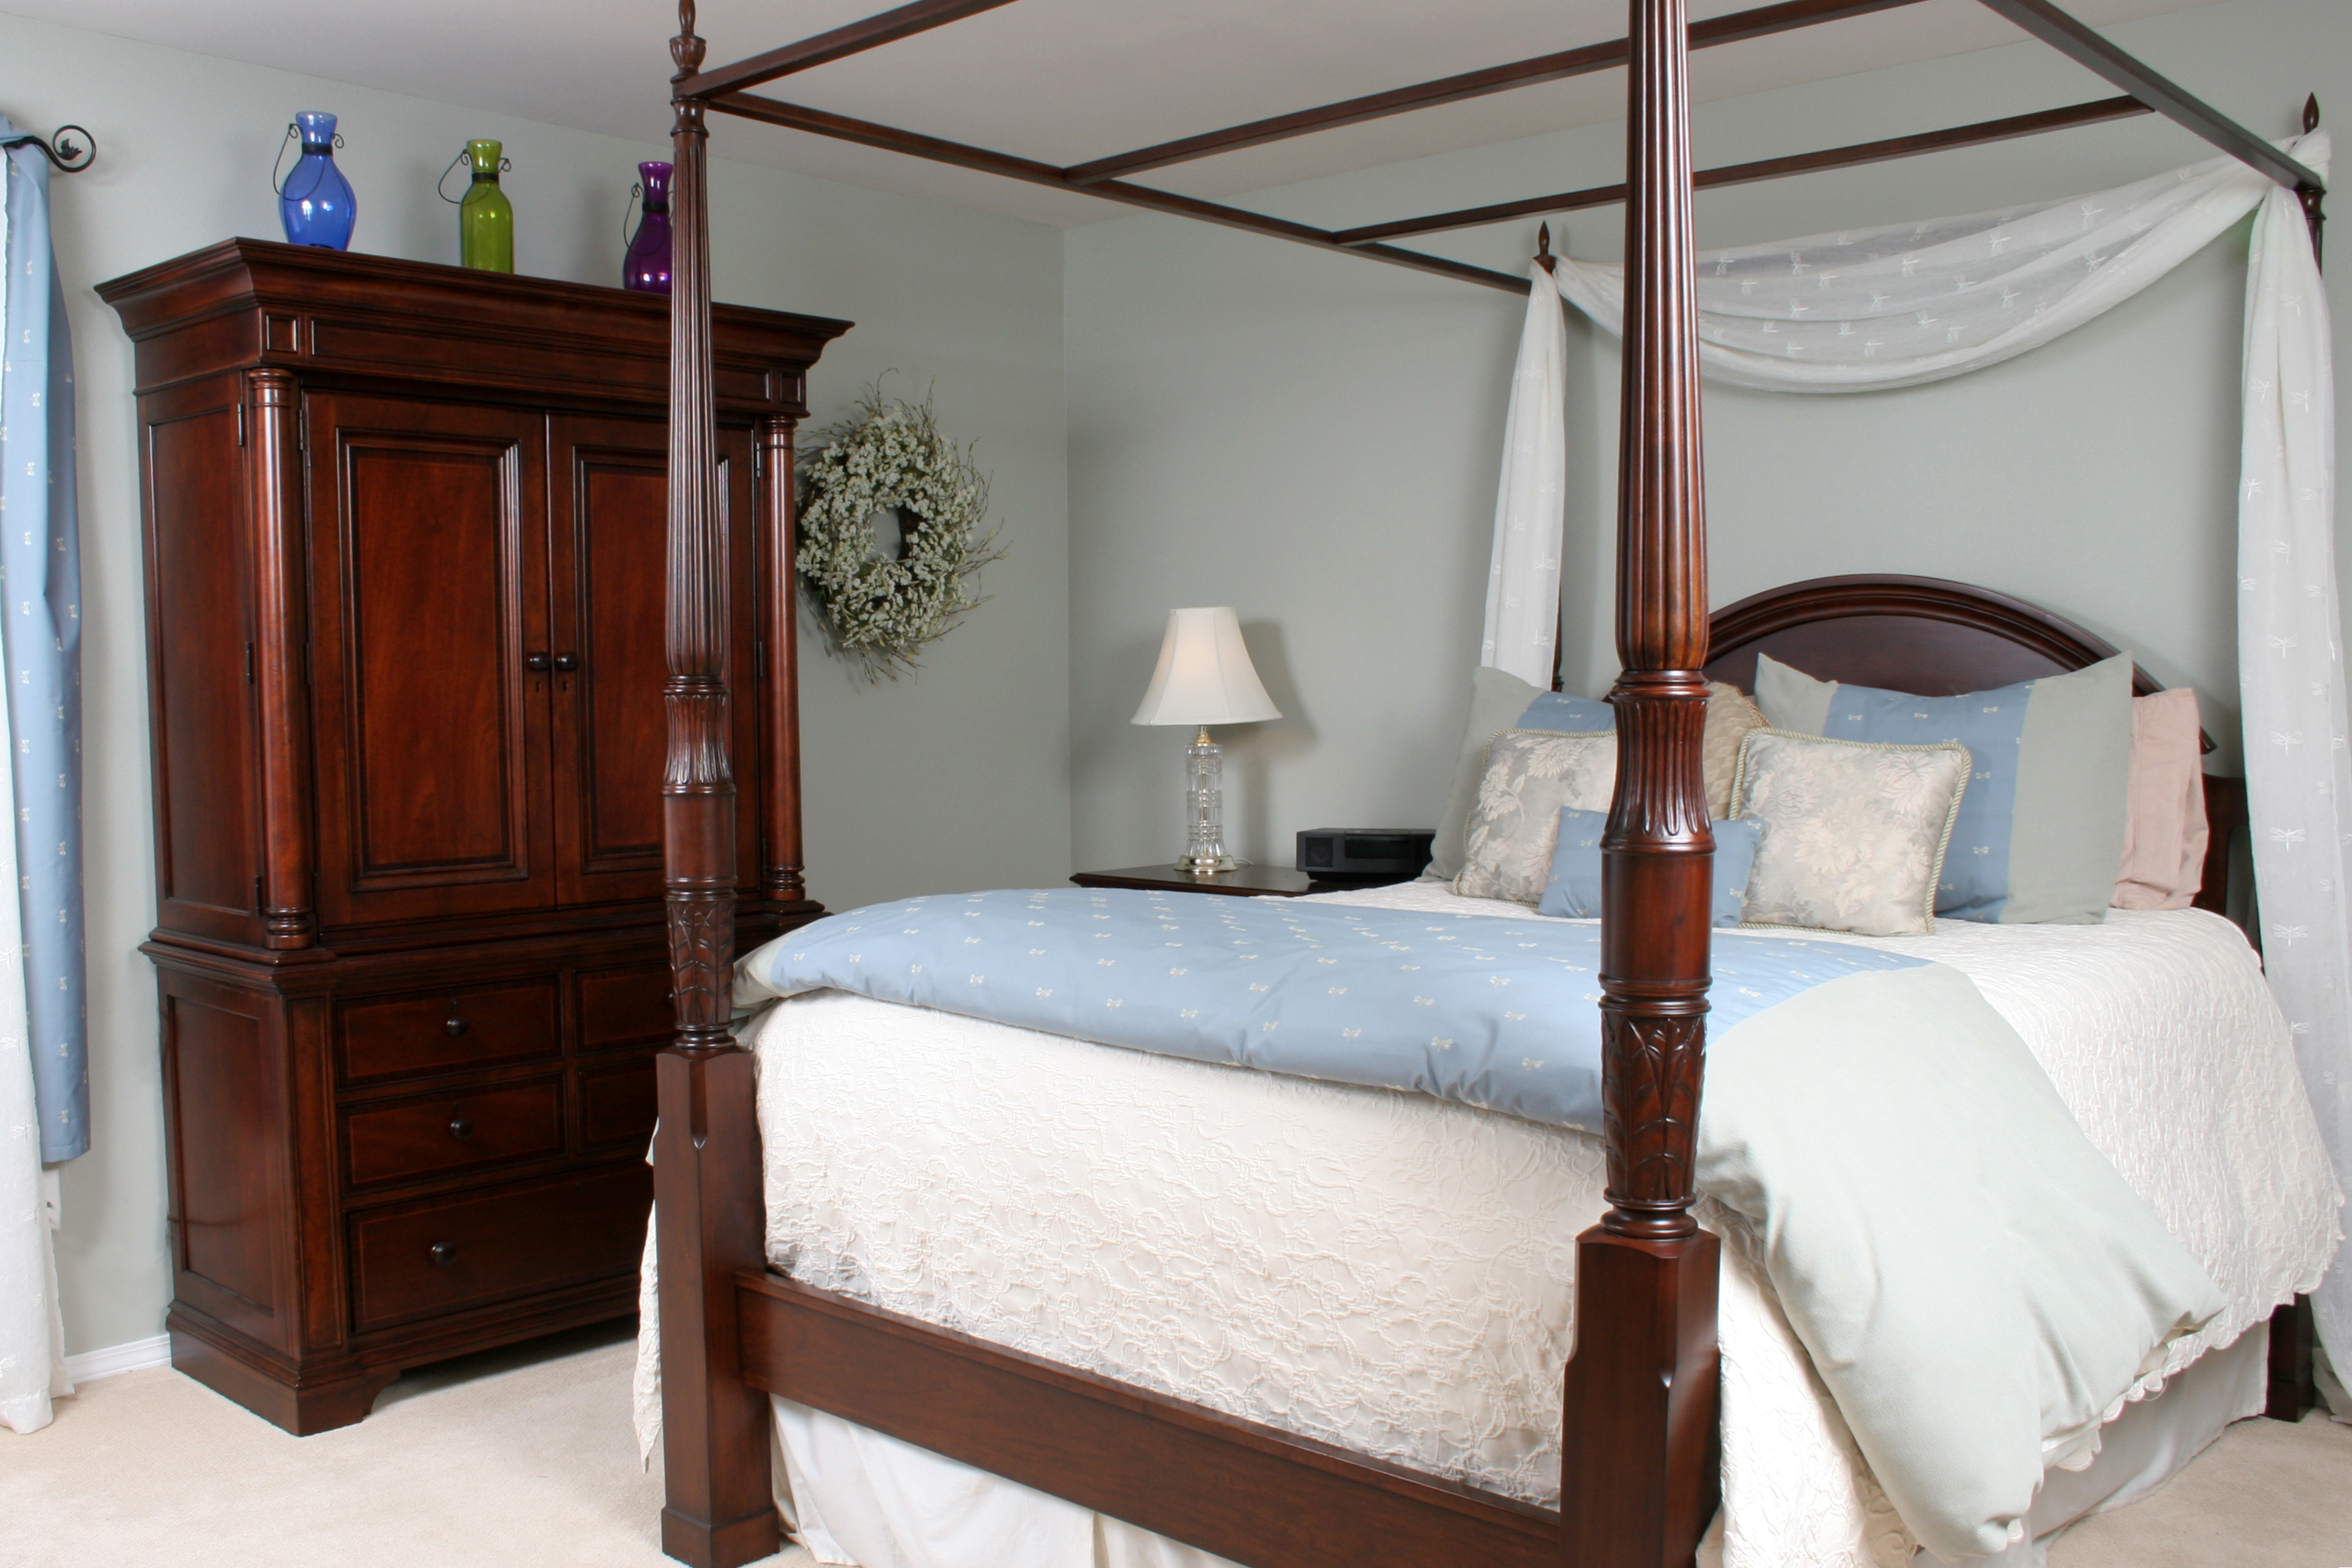 King Size And Queen Beds, All In One King Size Bed